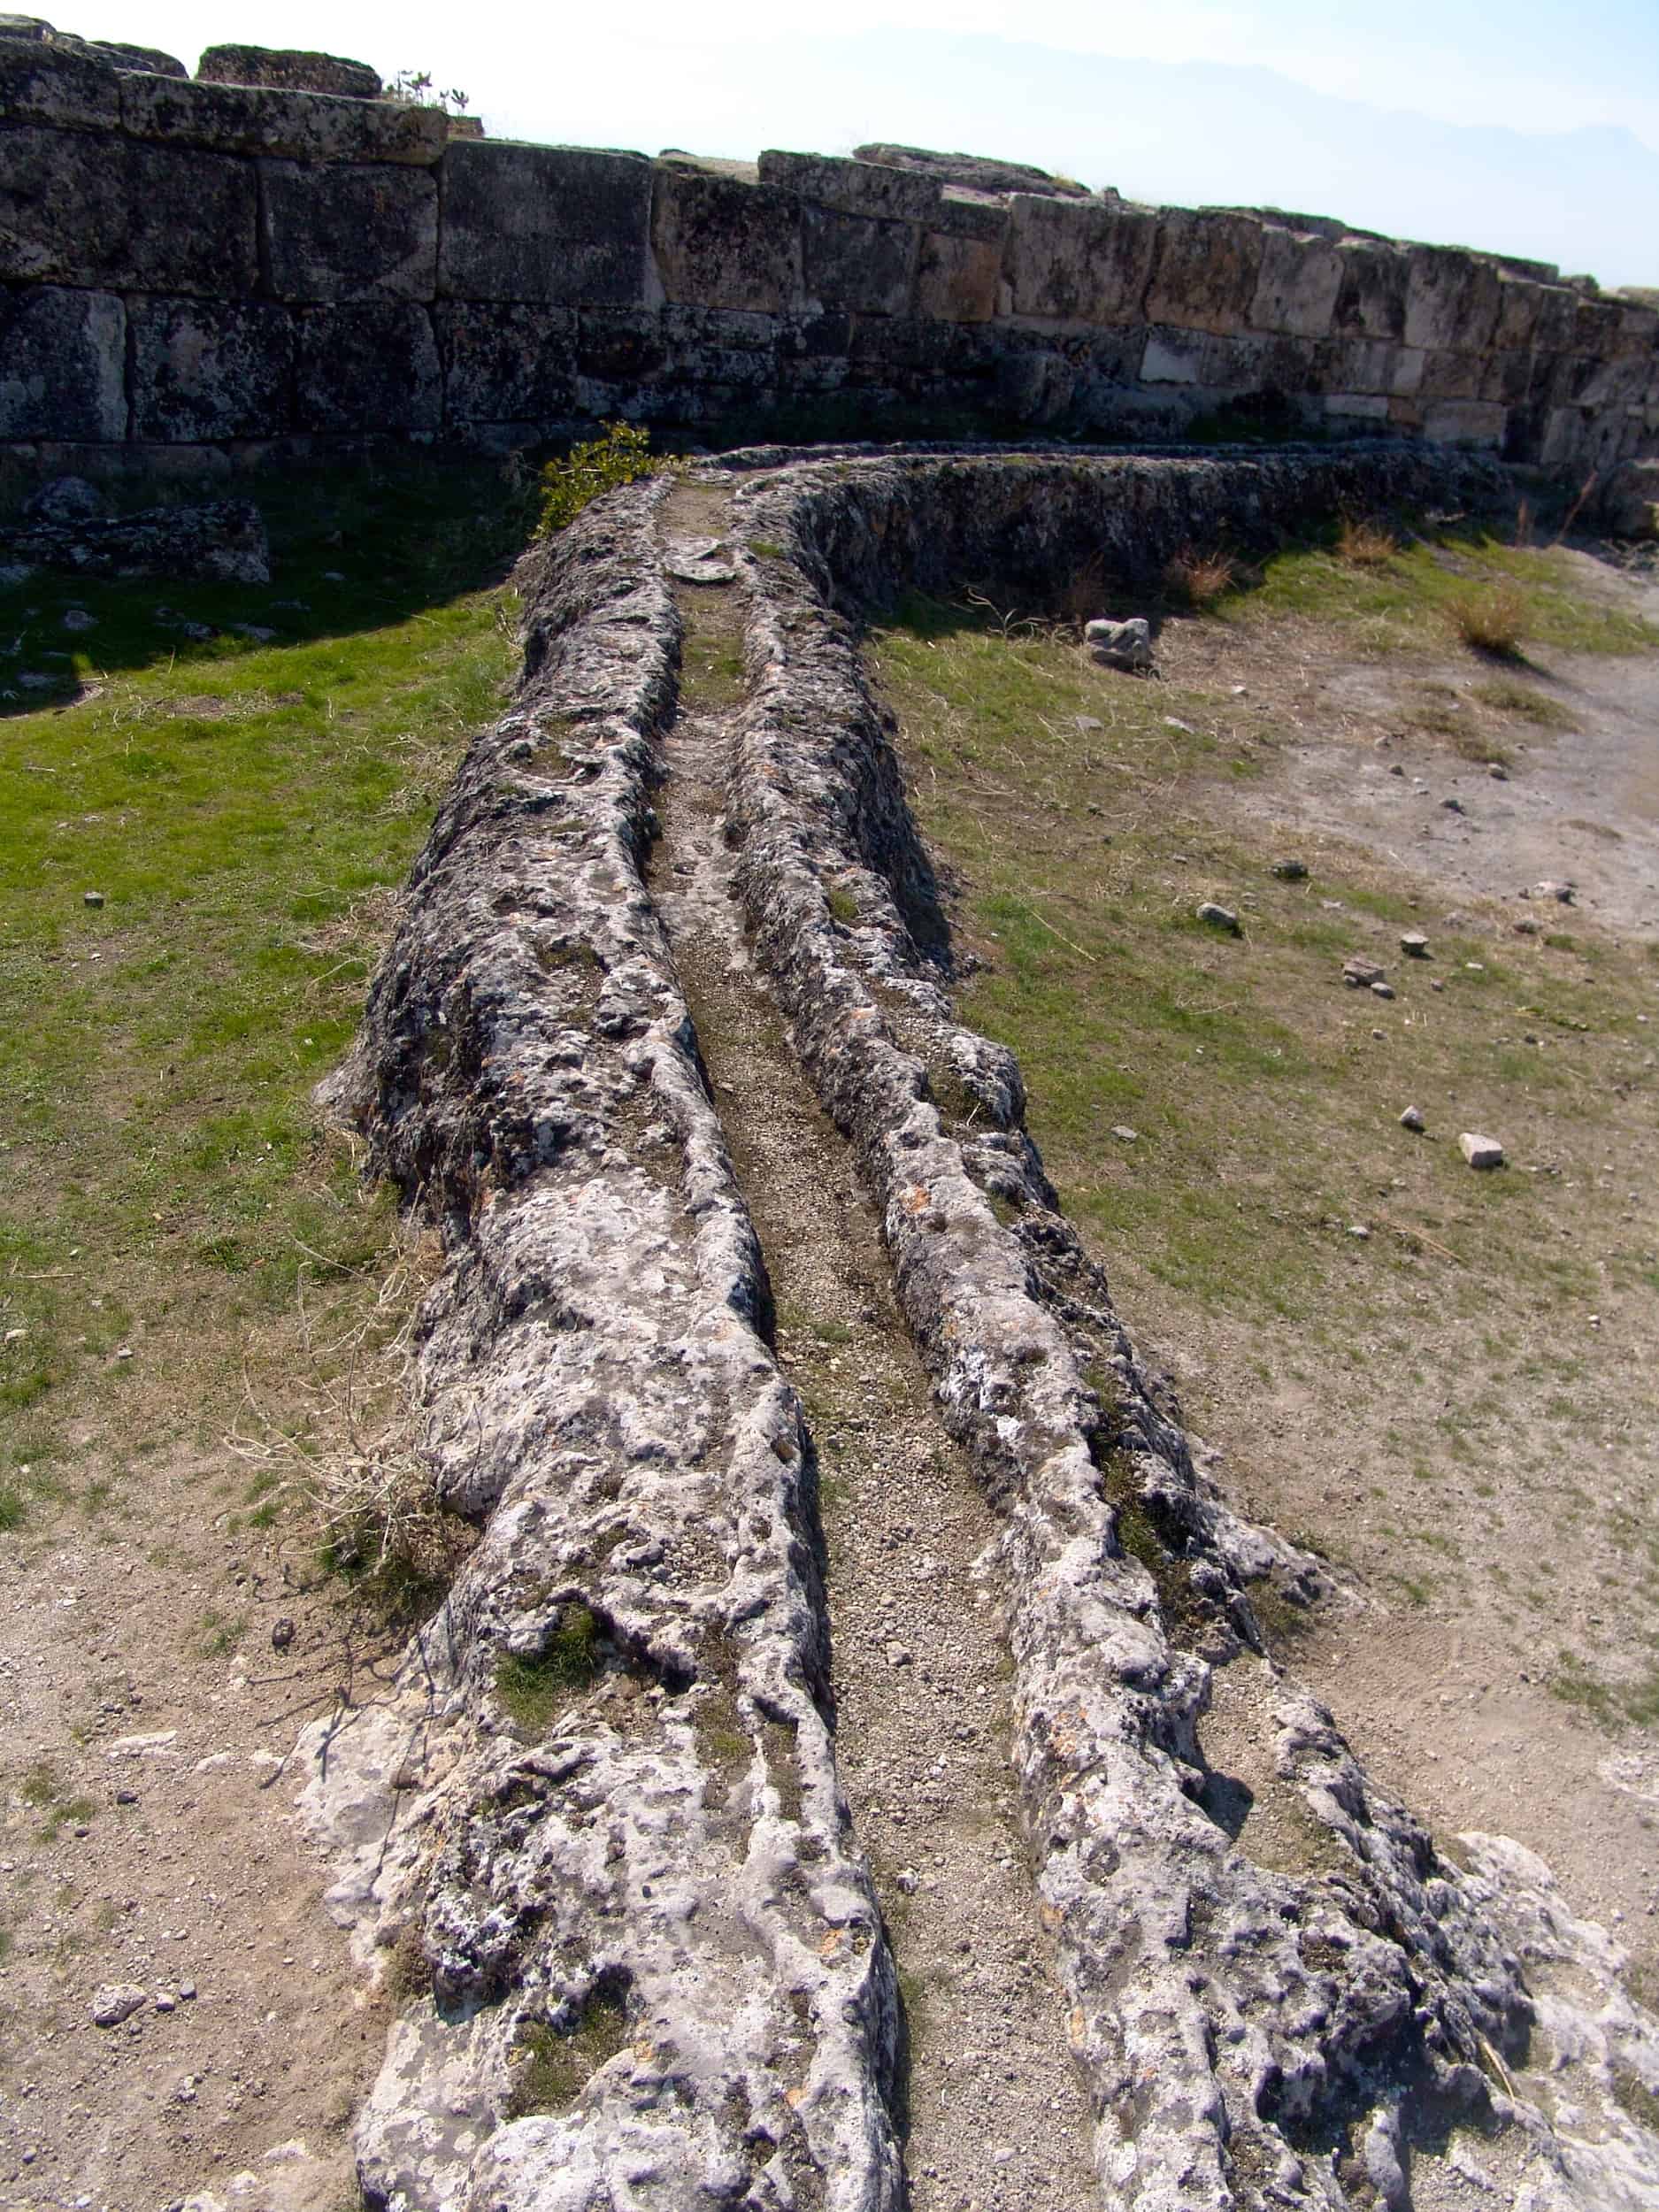 Water channel running from the walls of Hierapolis